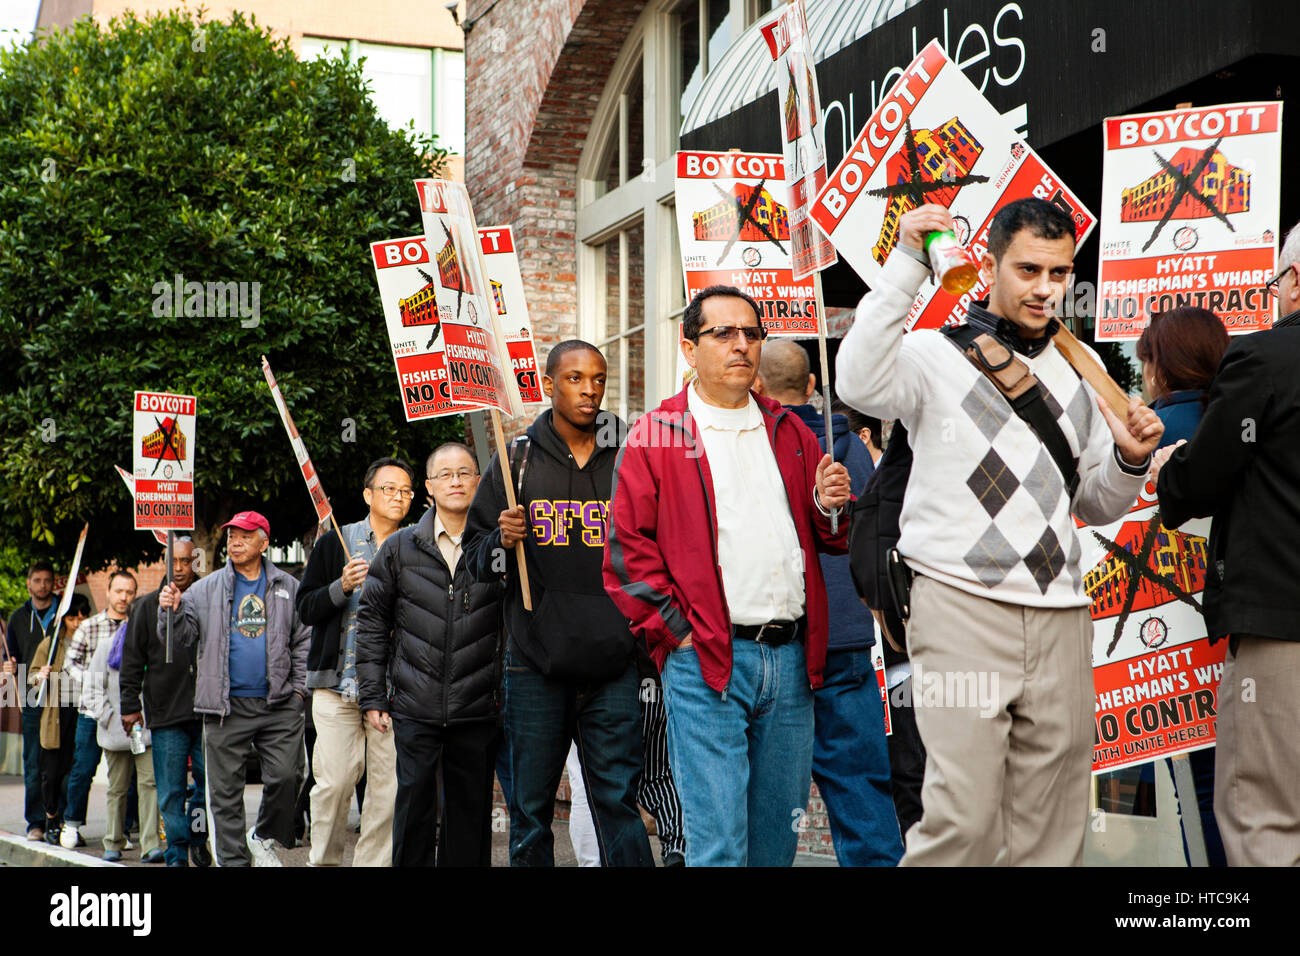 People marching holding boycott signs. Stock Photo